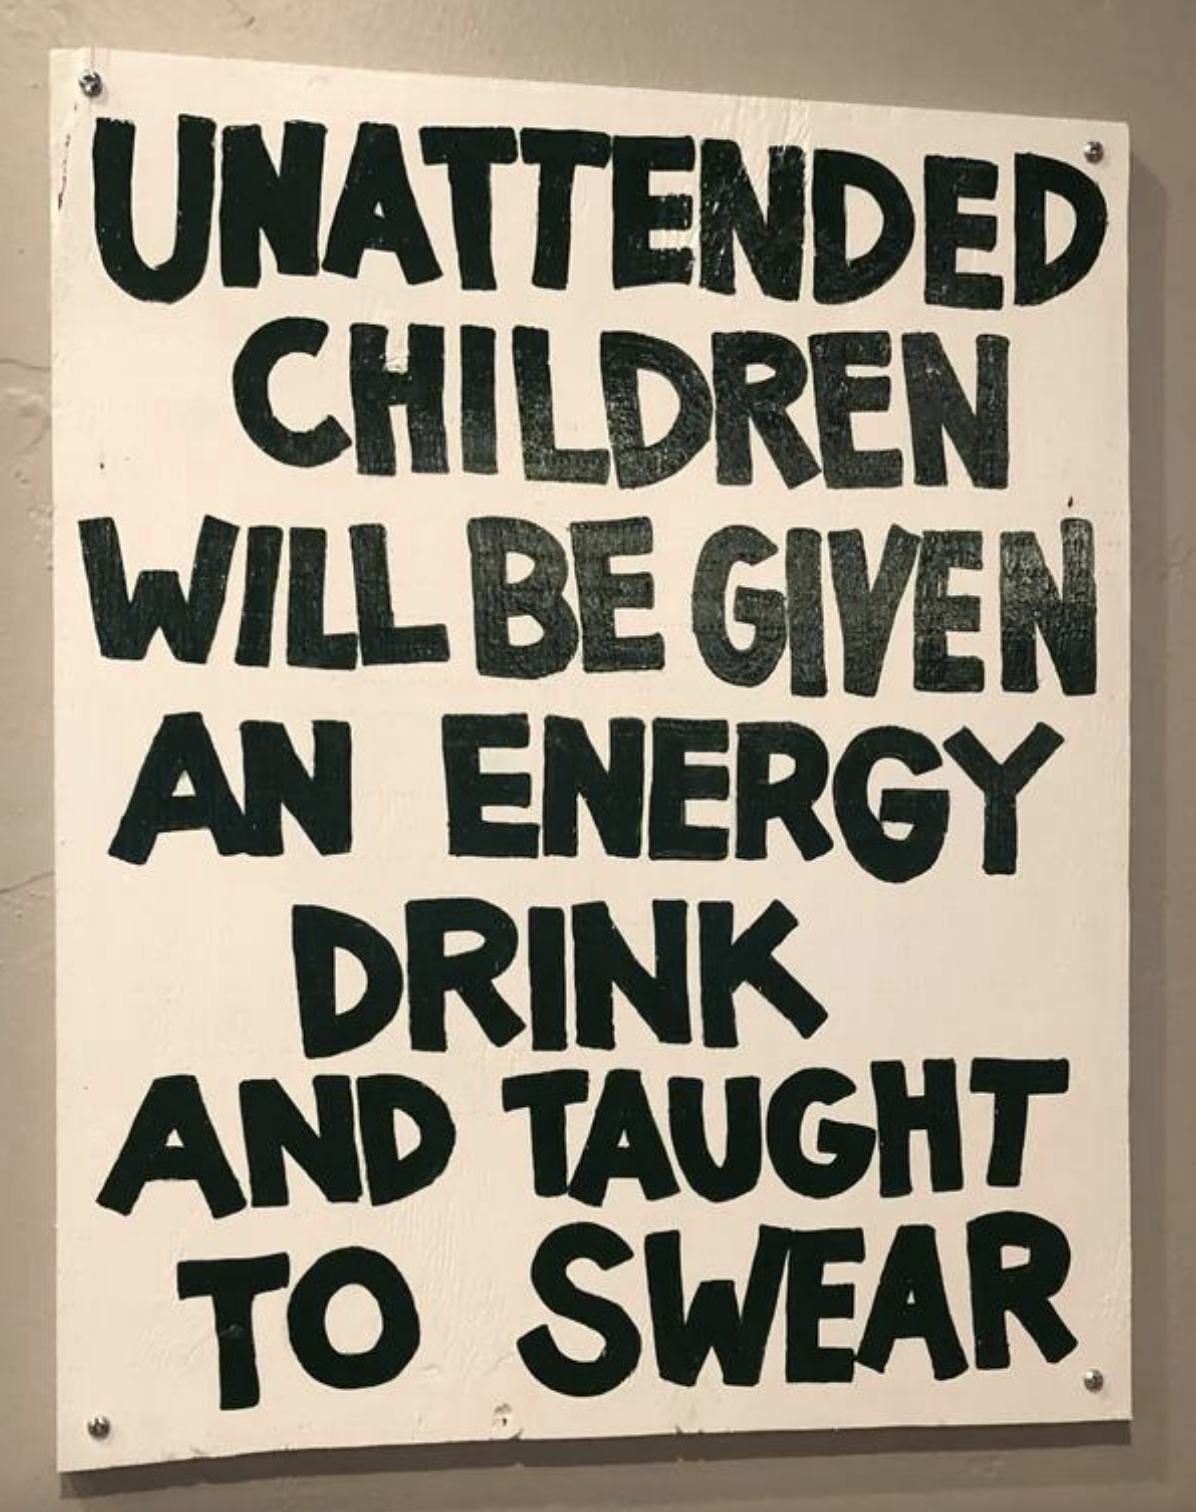 unattended children will be given an energy drink and taught to swear